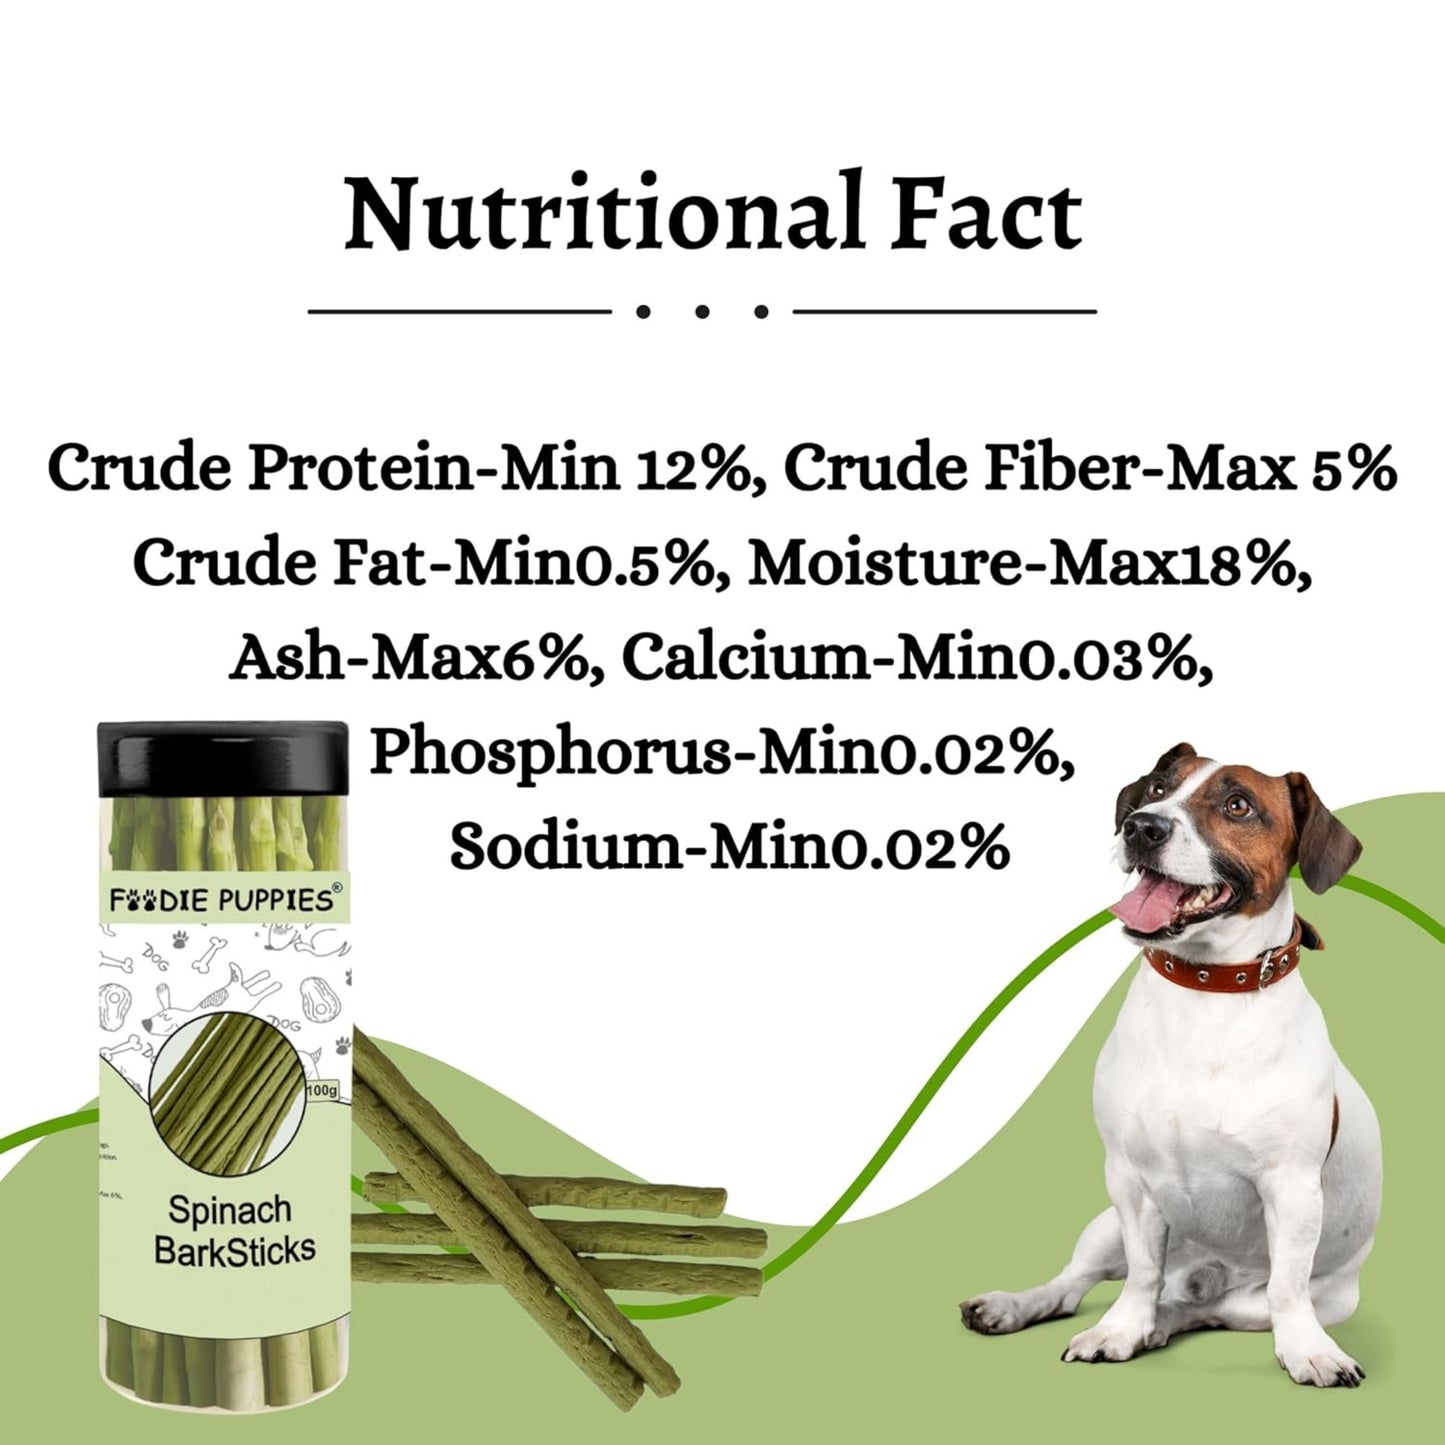 Foodie Puppies Barksticks Spinach Sticks Treat for Dogs - 100g, Pack of 5